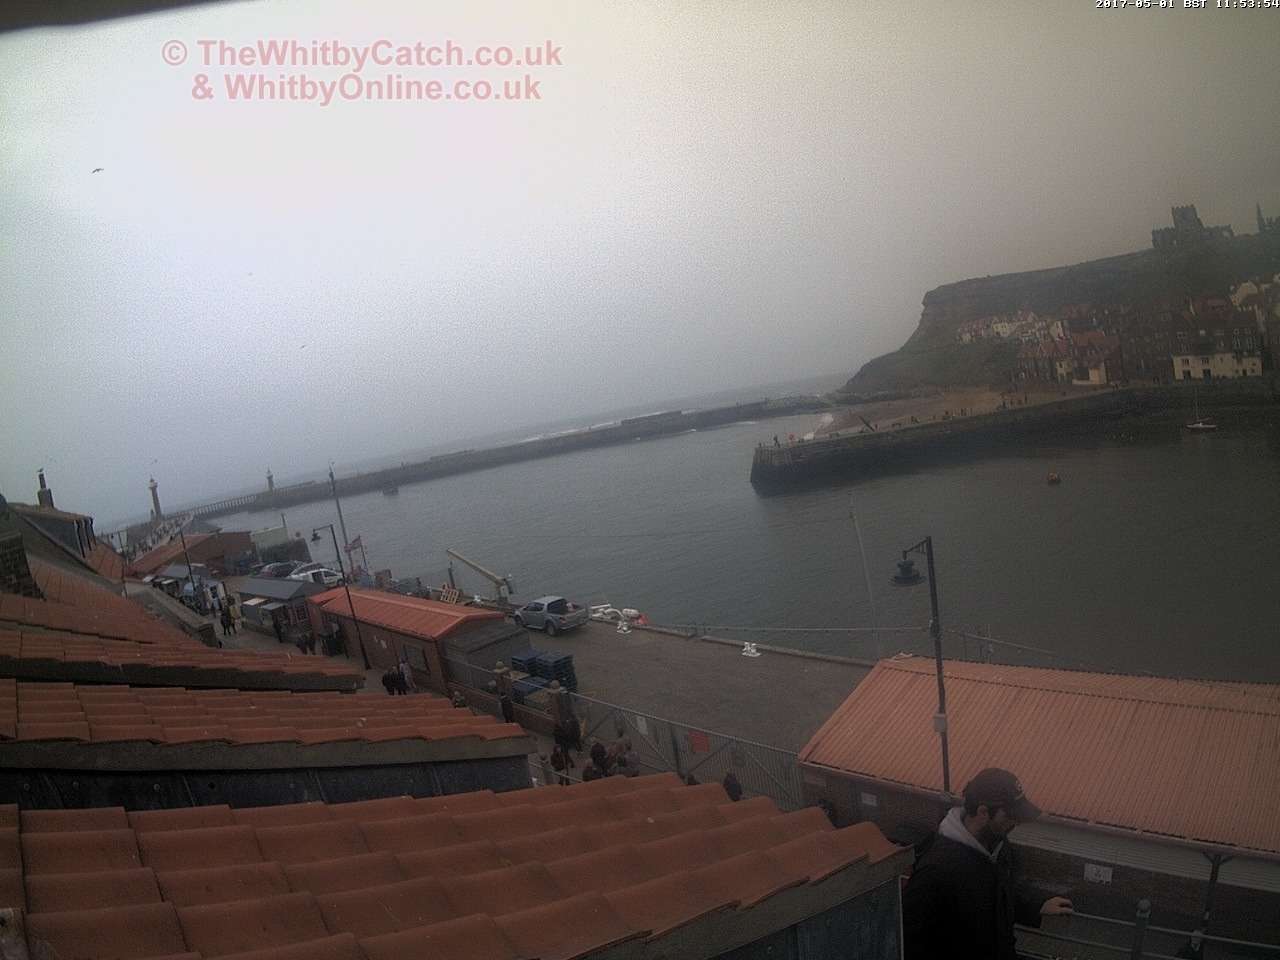 Whitby Mon 1st May 2017 11:54.